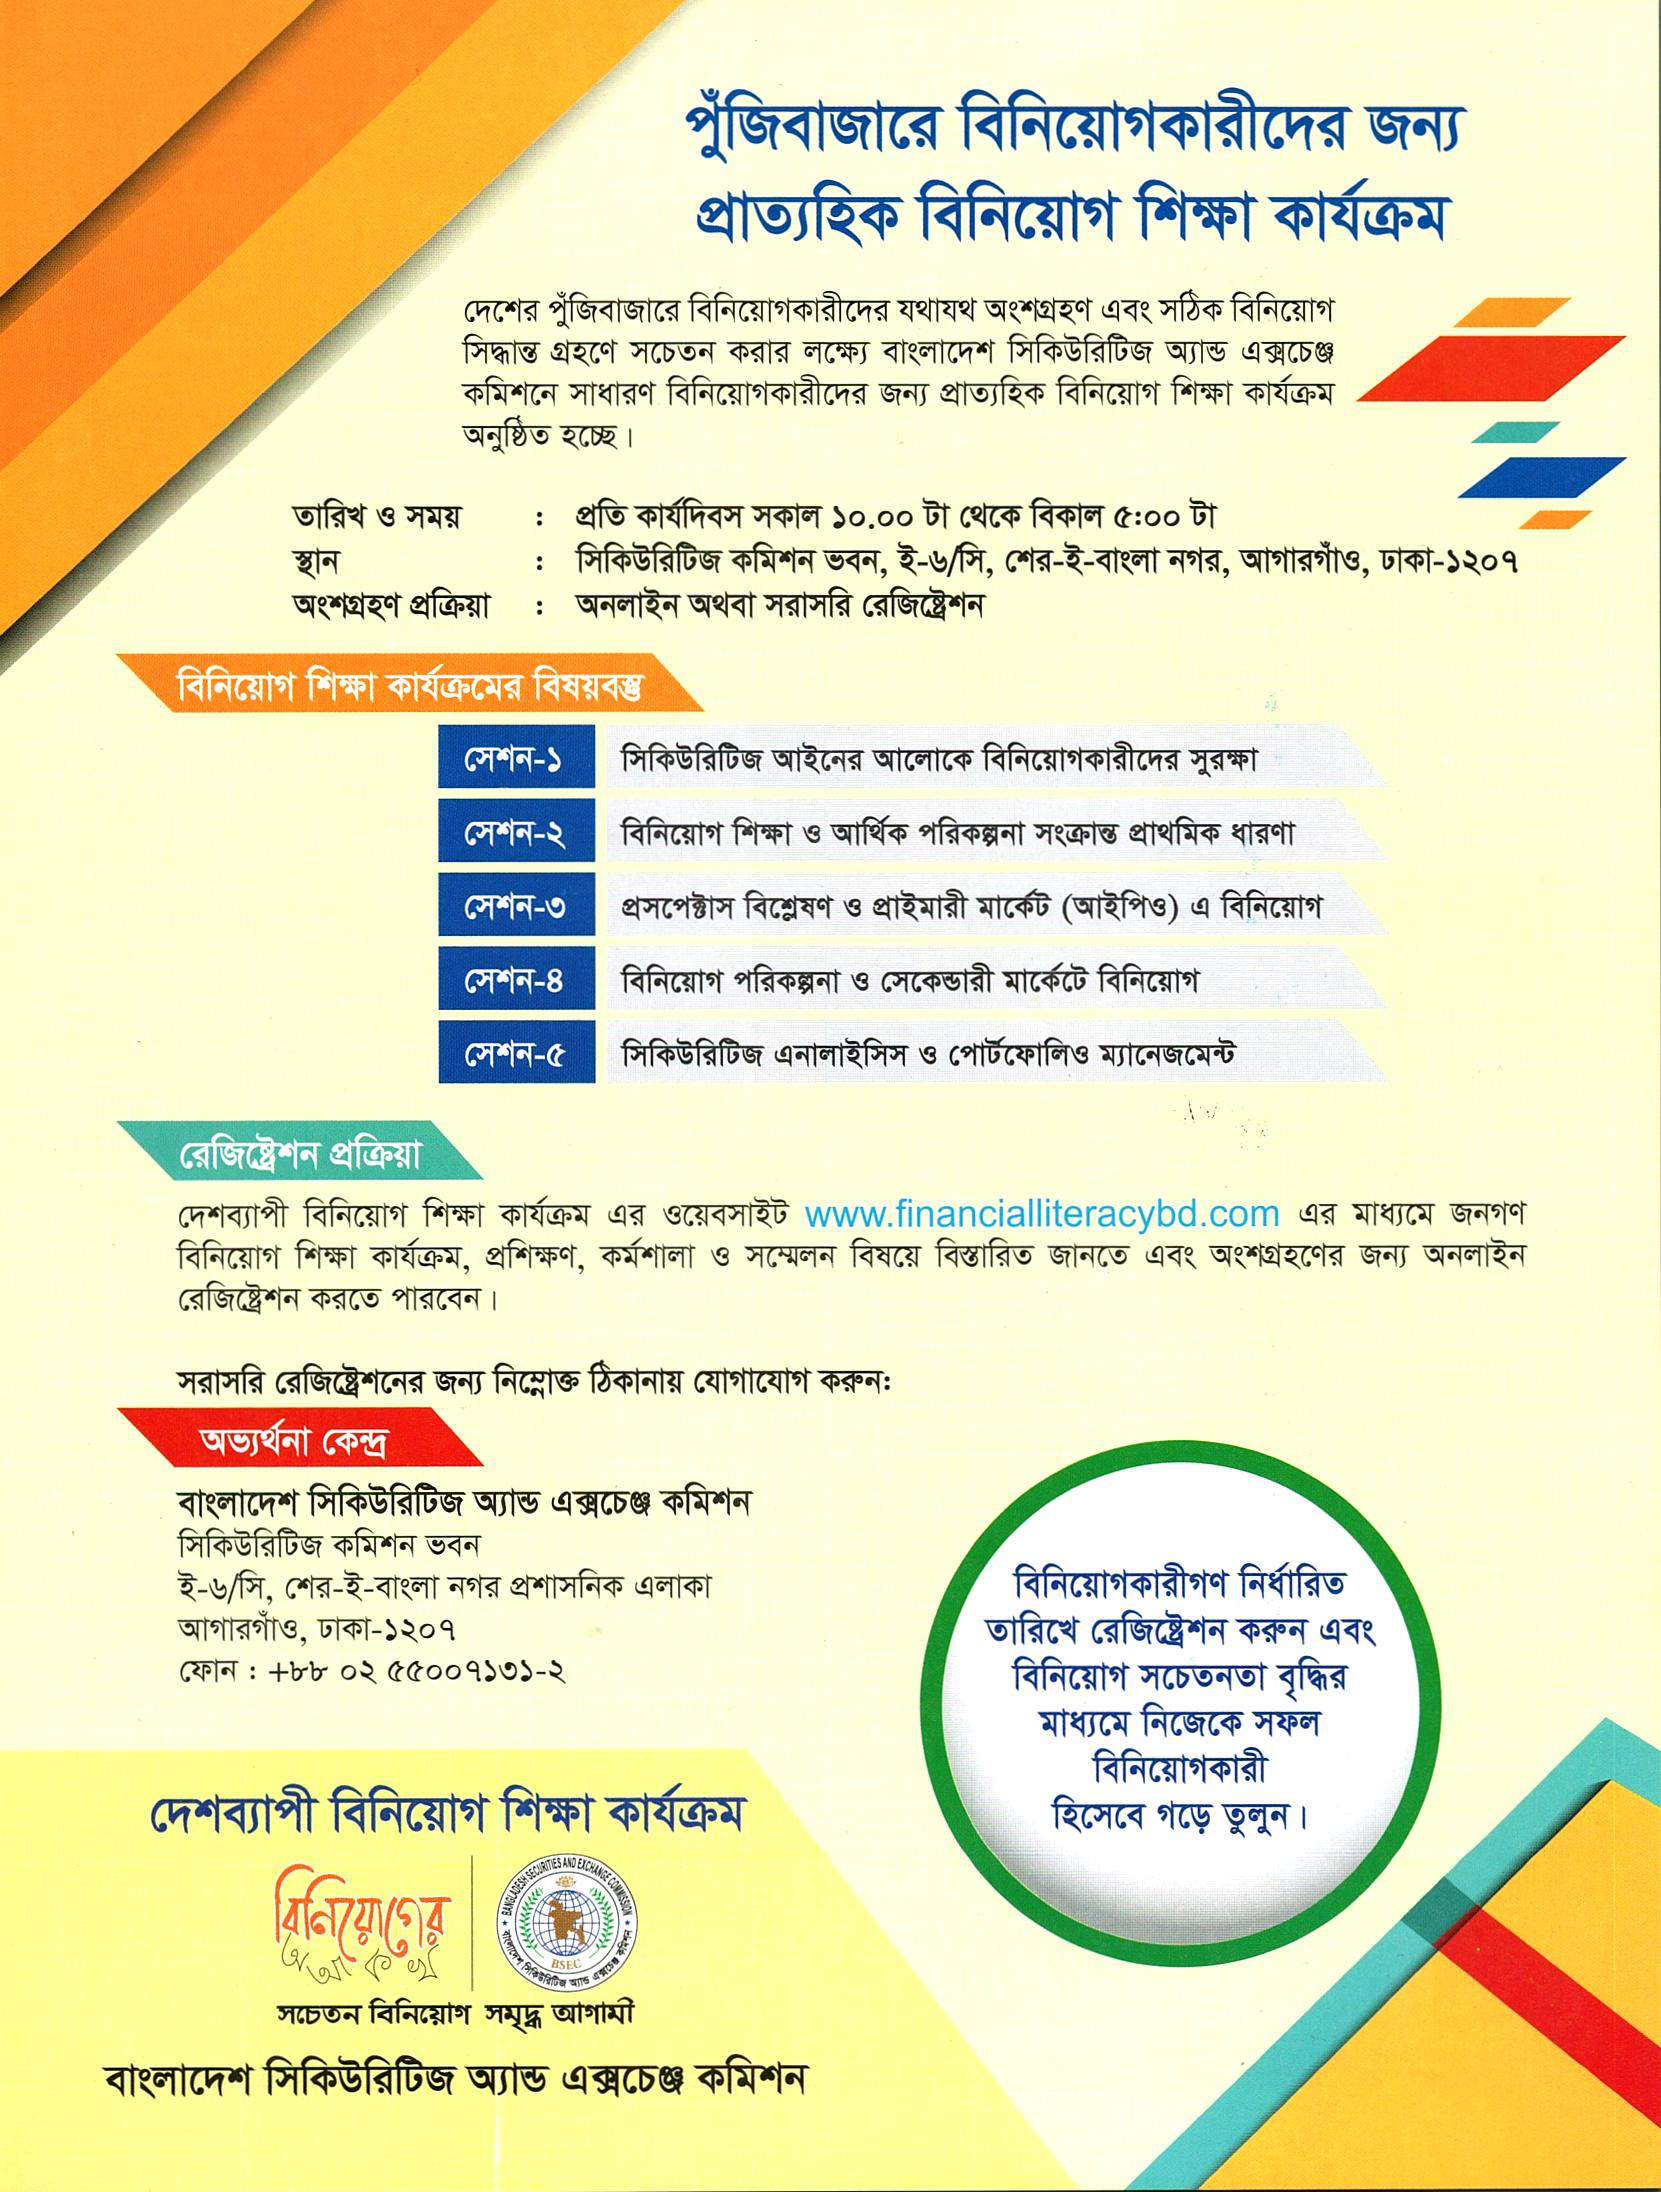 Free Training Courses in Bangladesh on Investment Education